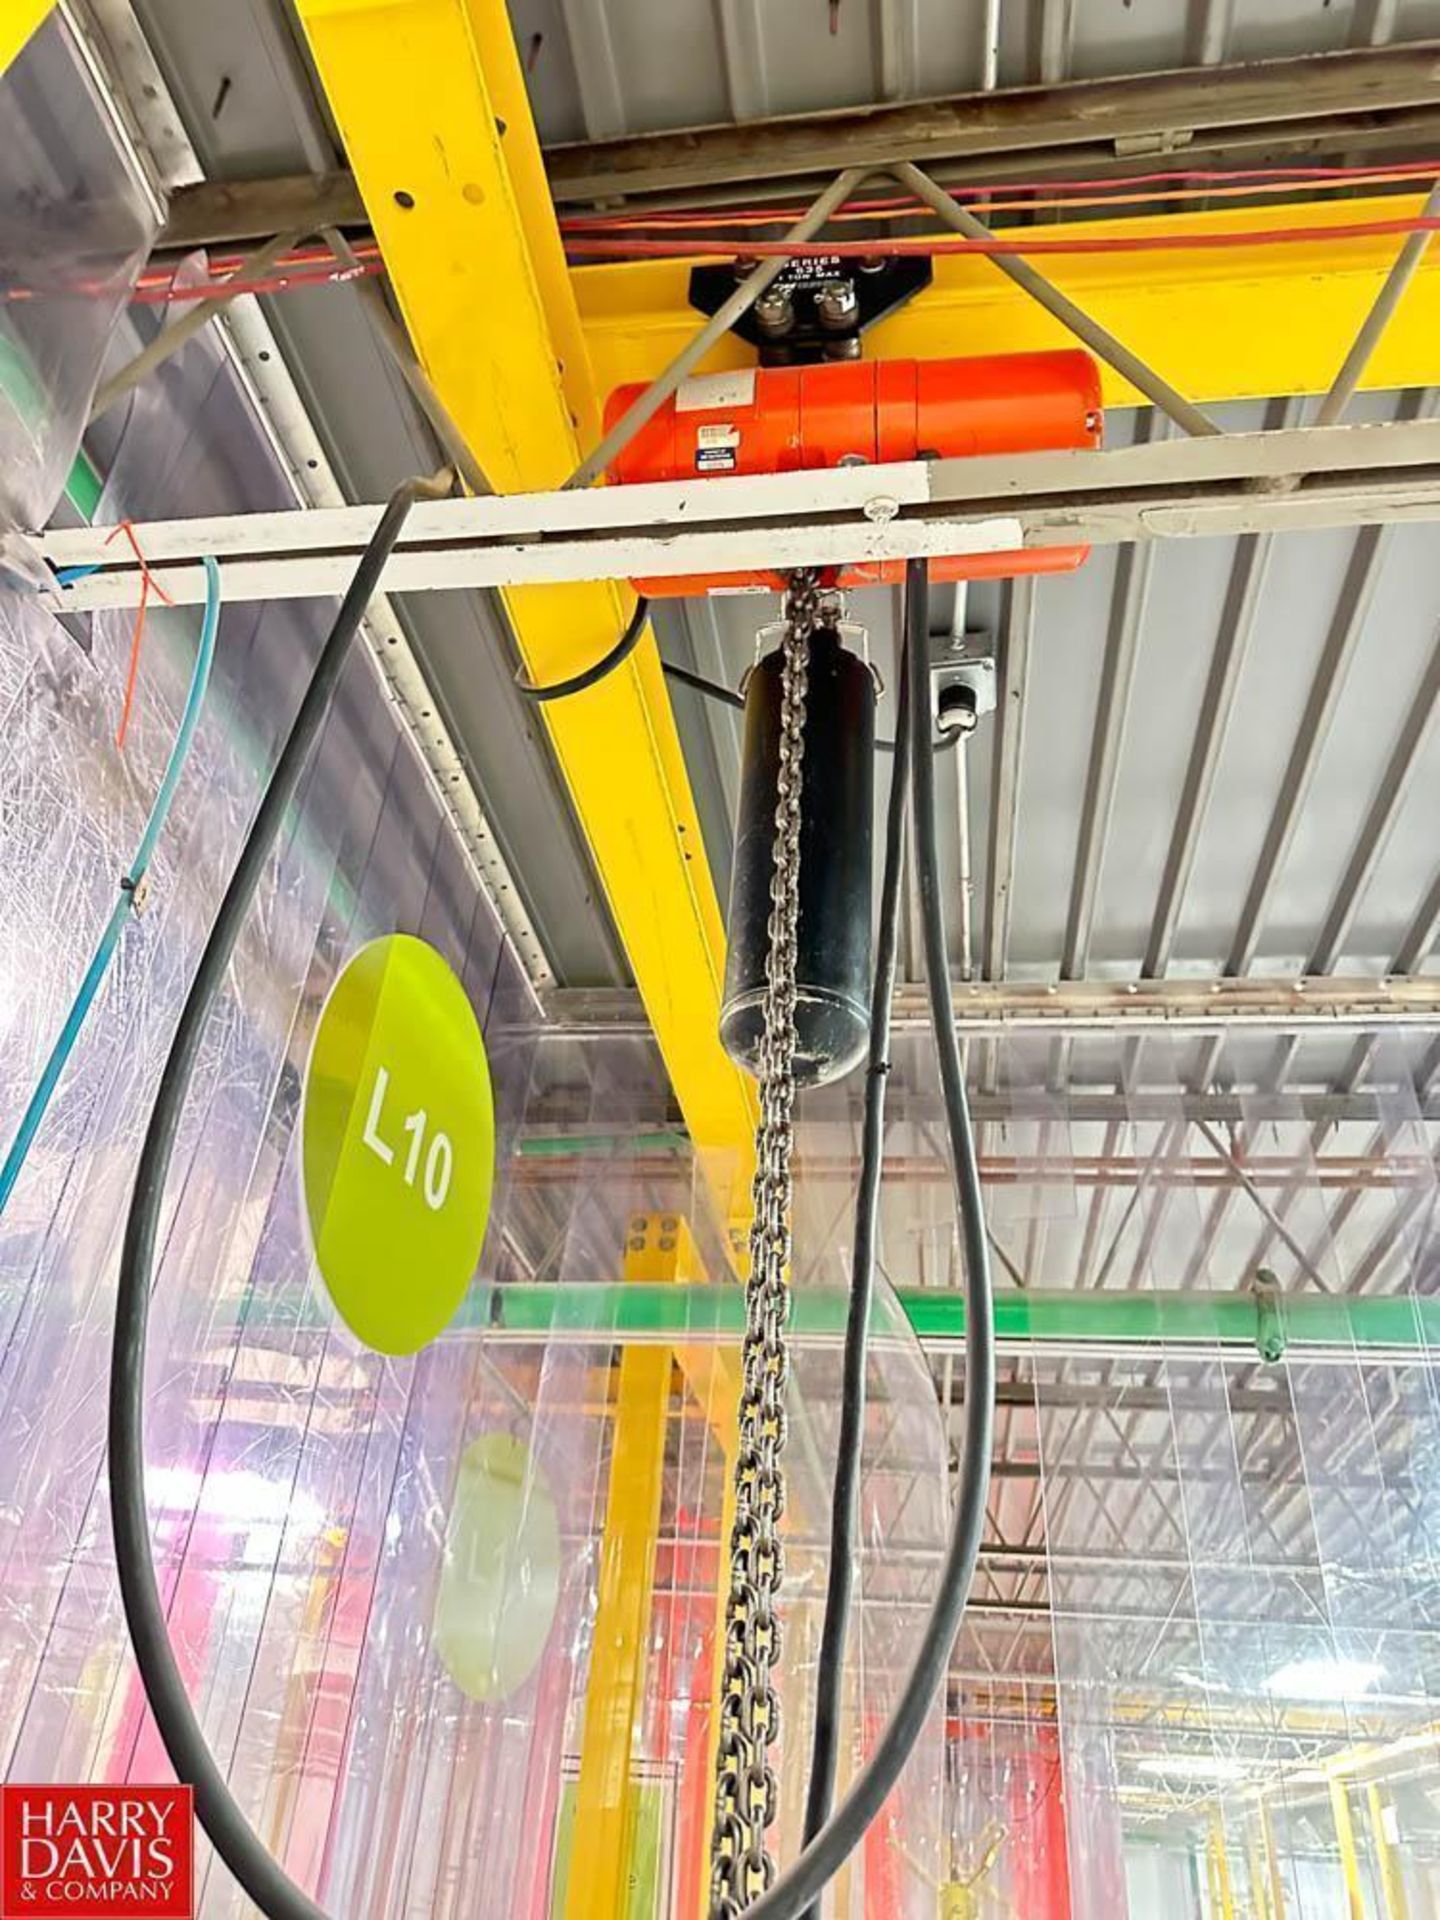 CM Lodestar 1 Ton Electric Chain Hoist with Gantry System - Rigging Fee: $750 - Image 2 of 2